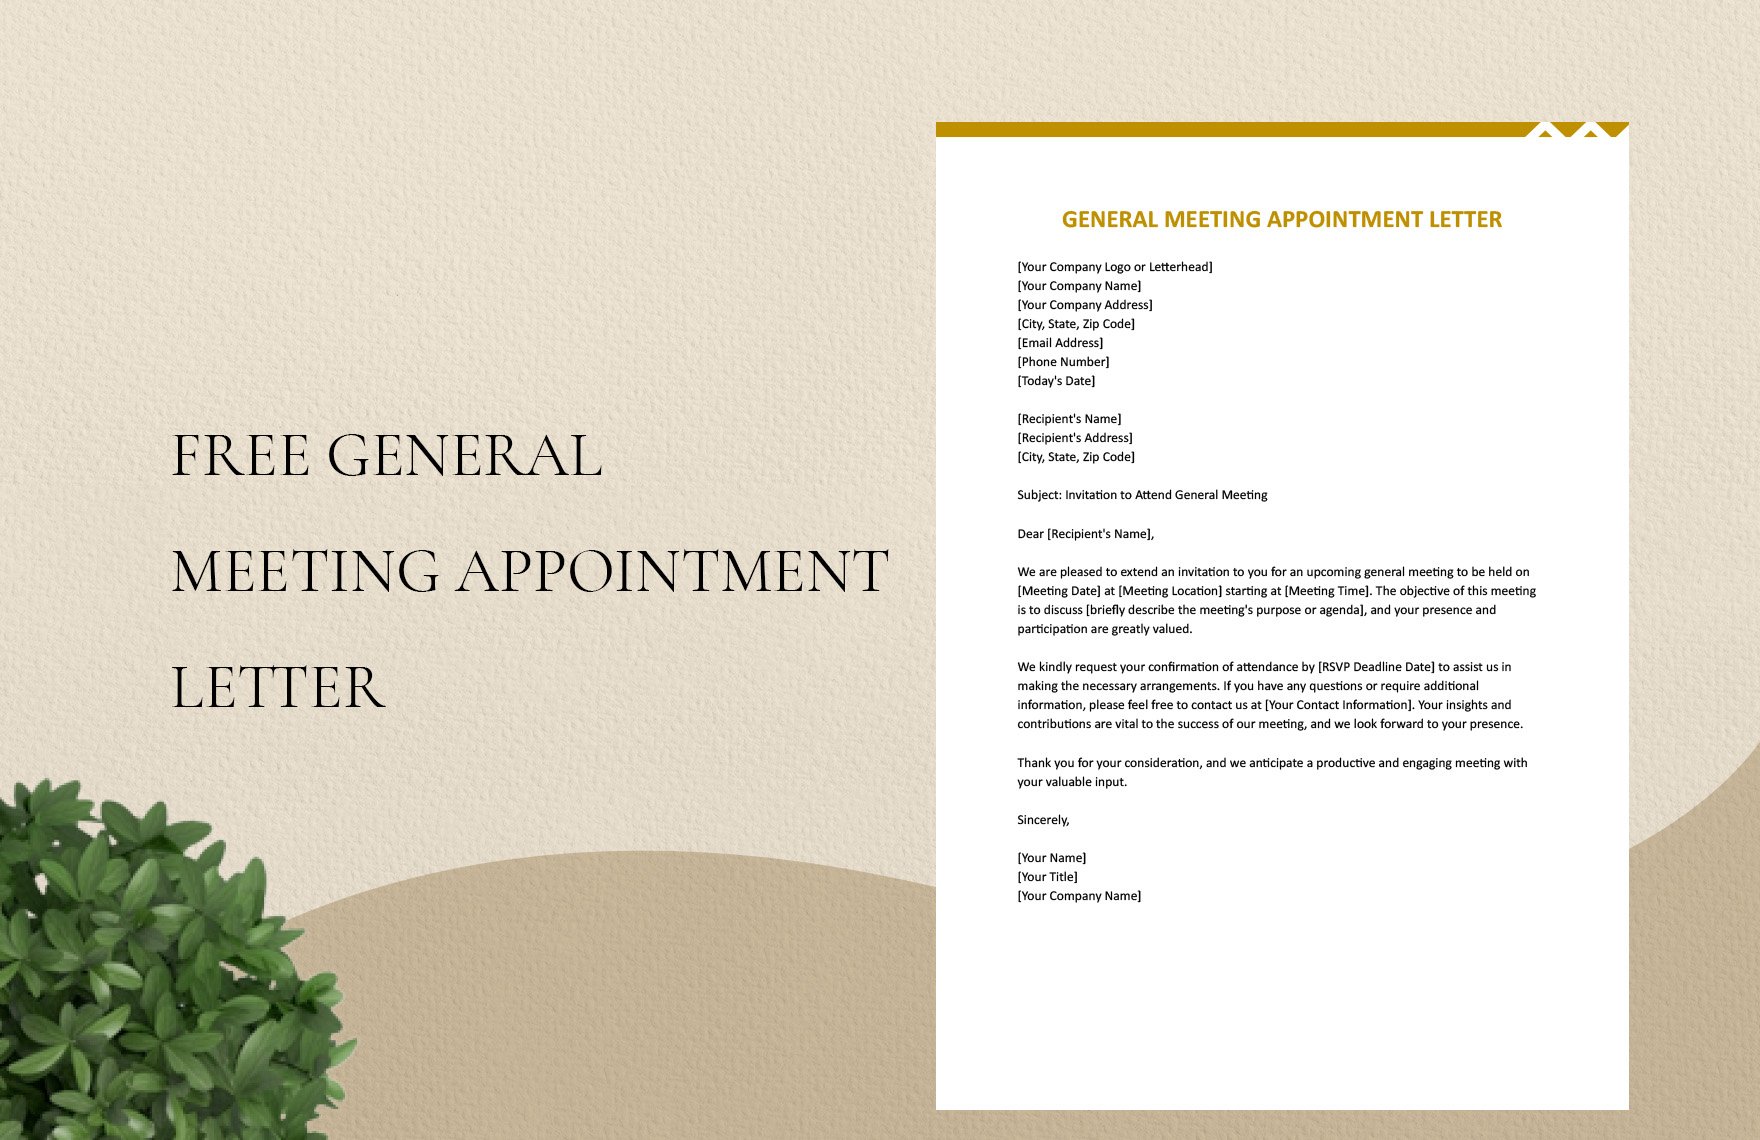 Free General Meeting Appointment Letter